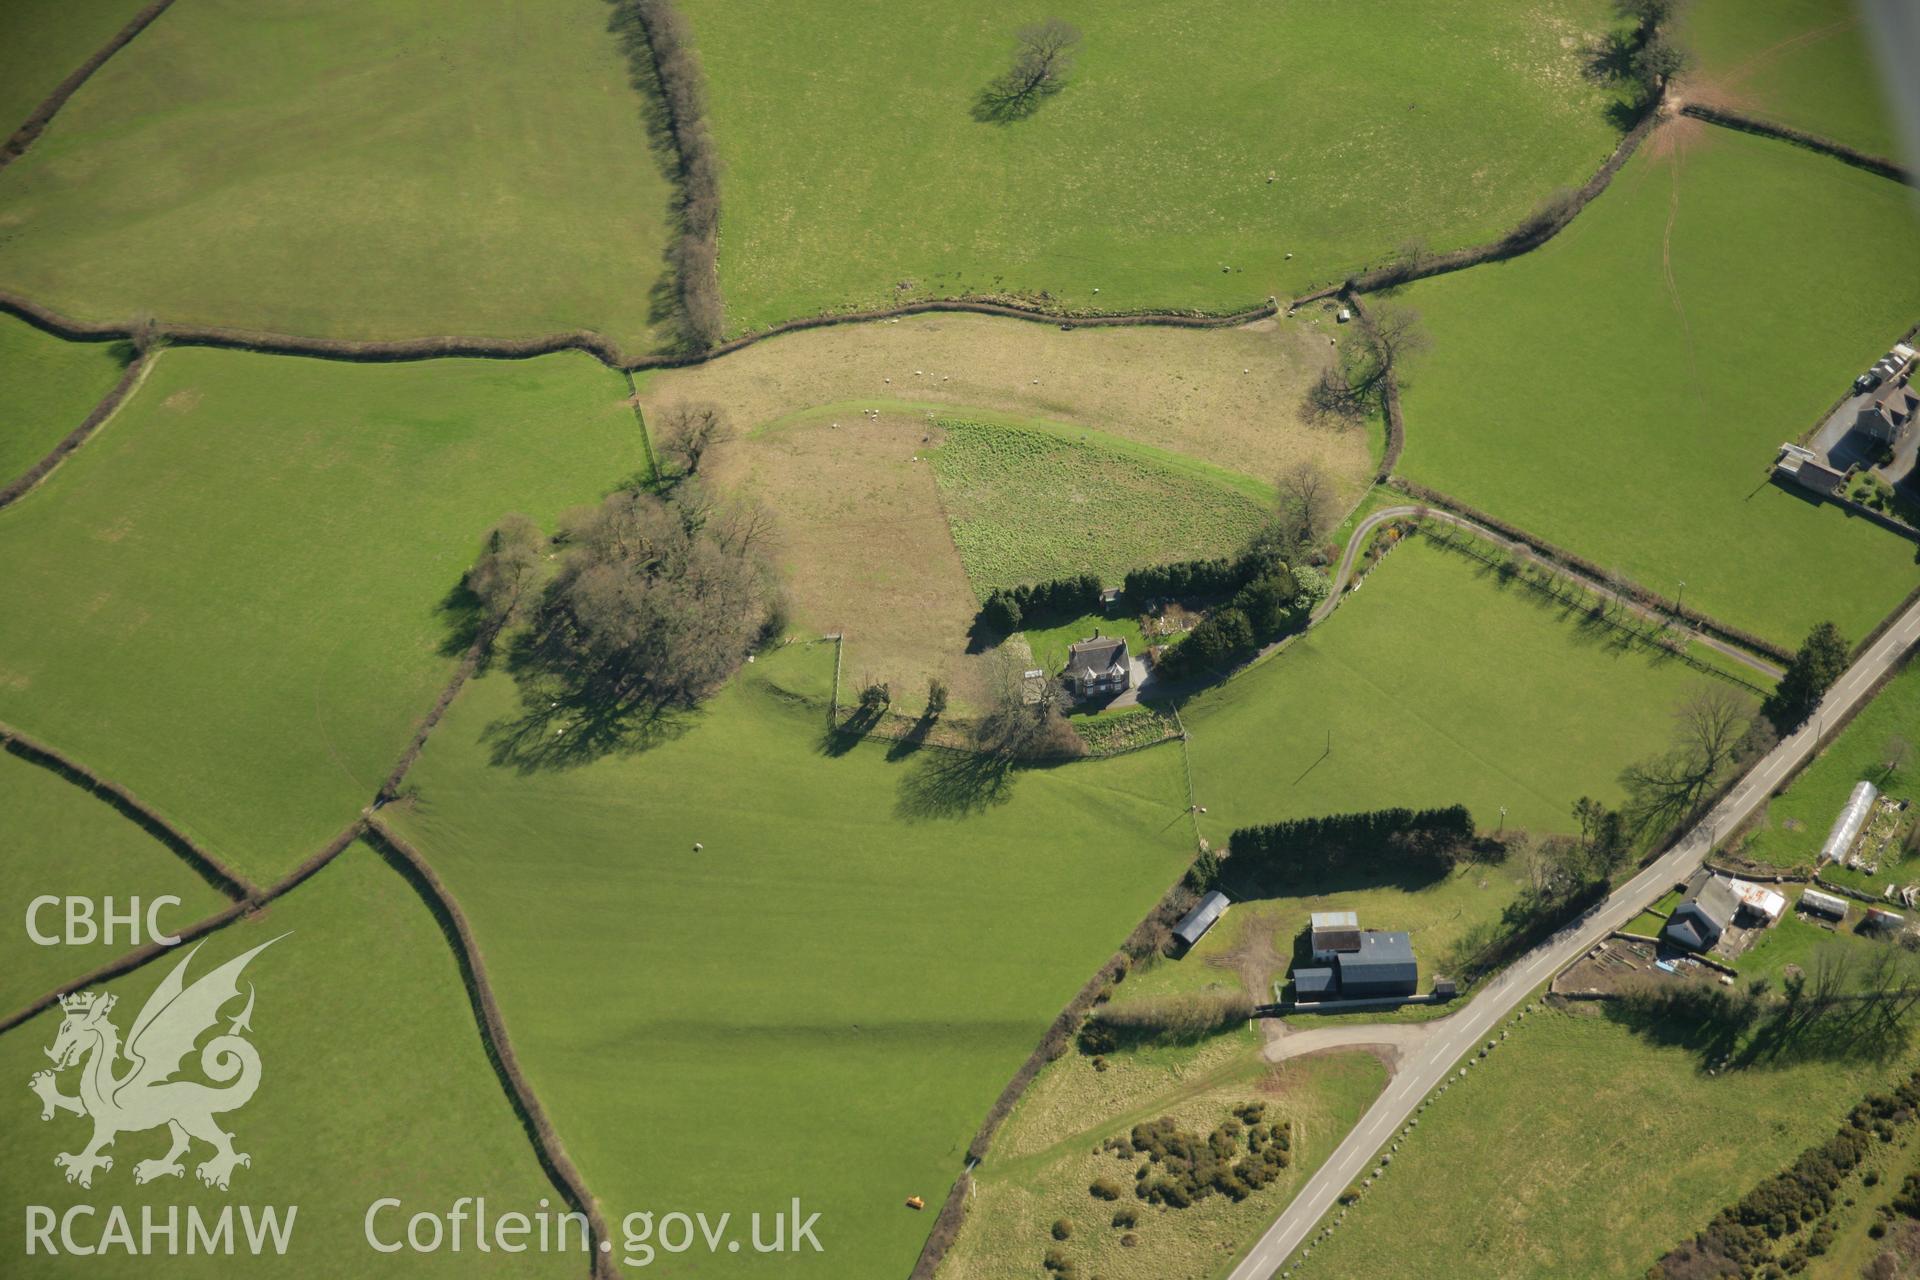 RCAHMW colour oblique aerial photograph of Castell Llangadog. Taken on 21 March 2007 by Toby Driver